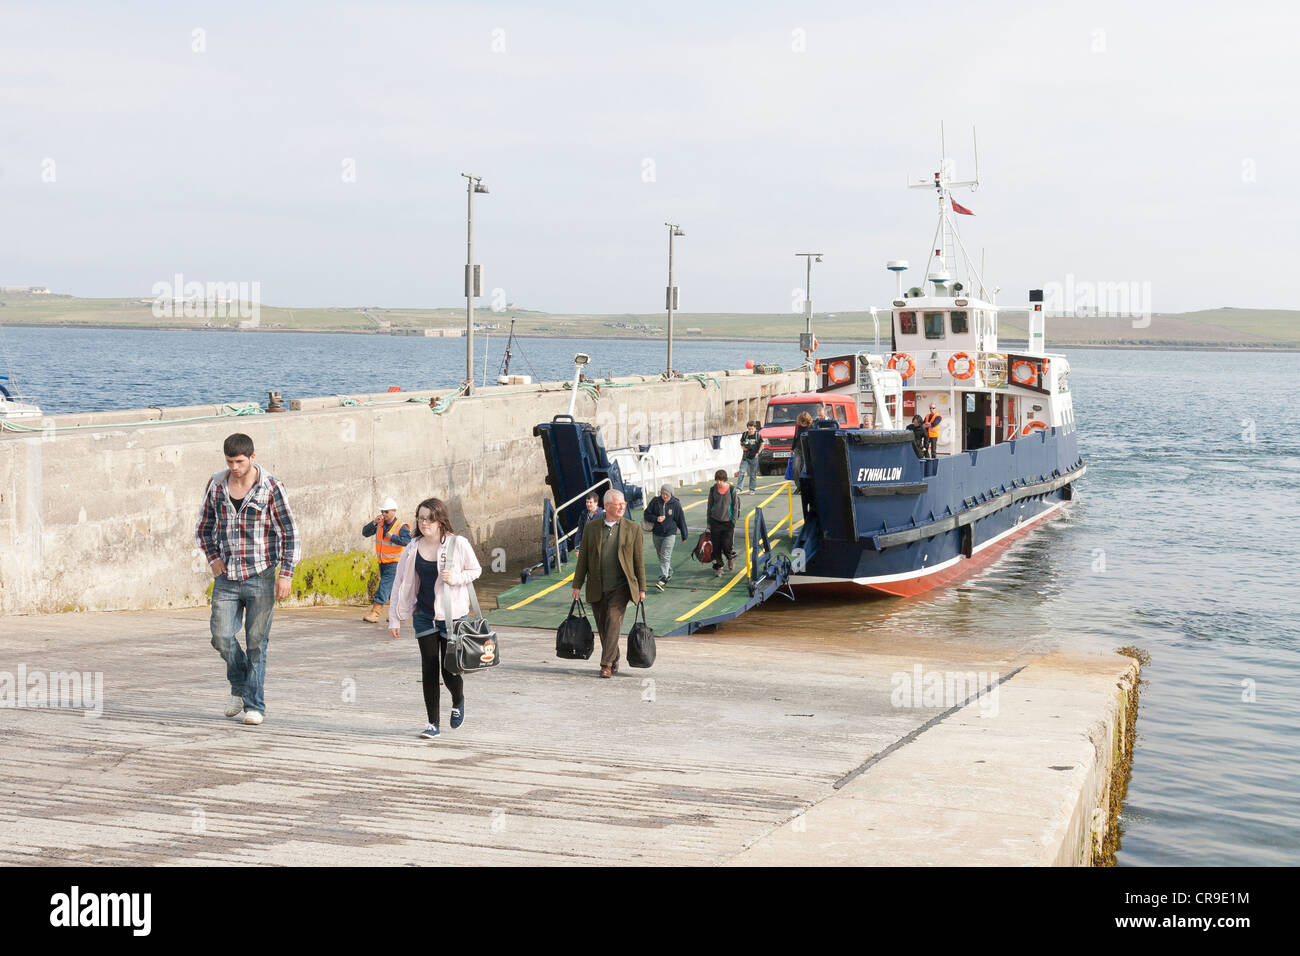 The Island of Rousay - Orkney Islands, Scotland.  Passengers leaving the ferry Stock Photo